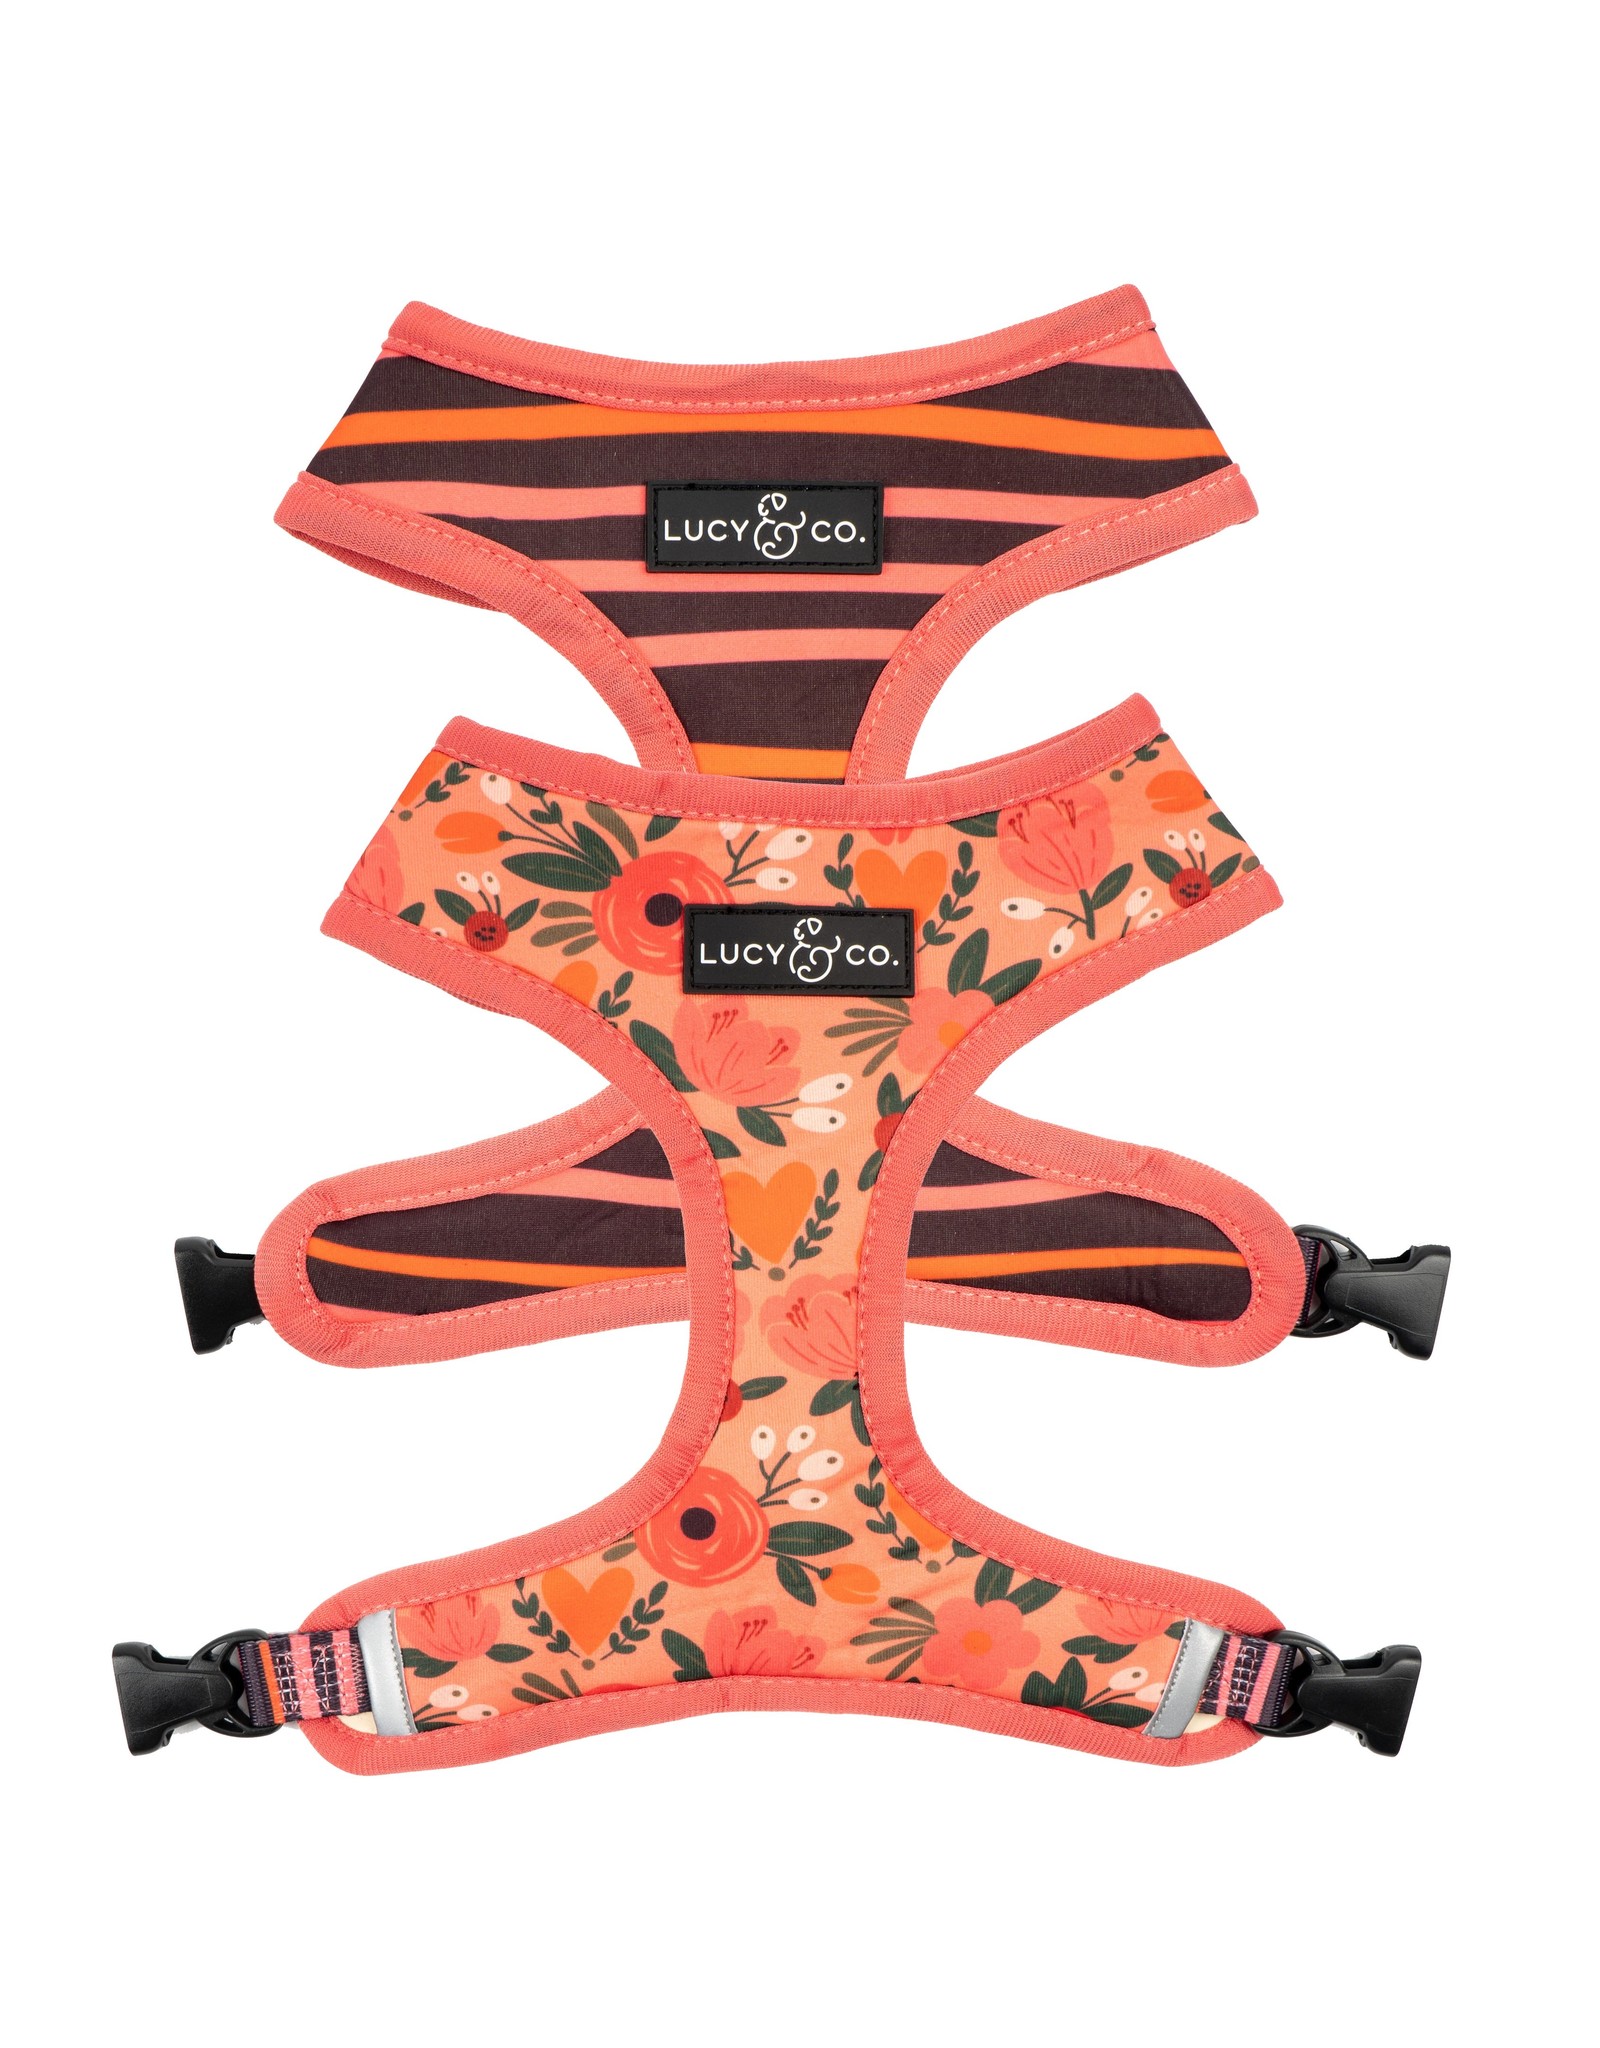 Lucy & Co. LUCY & CO. POSY PINK REVERSIBLE HARNESS